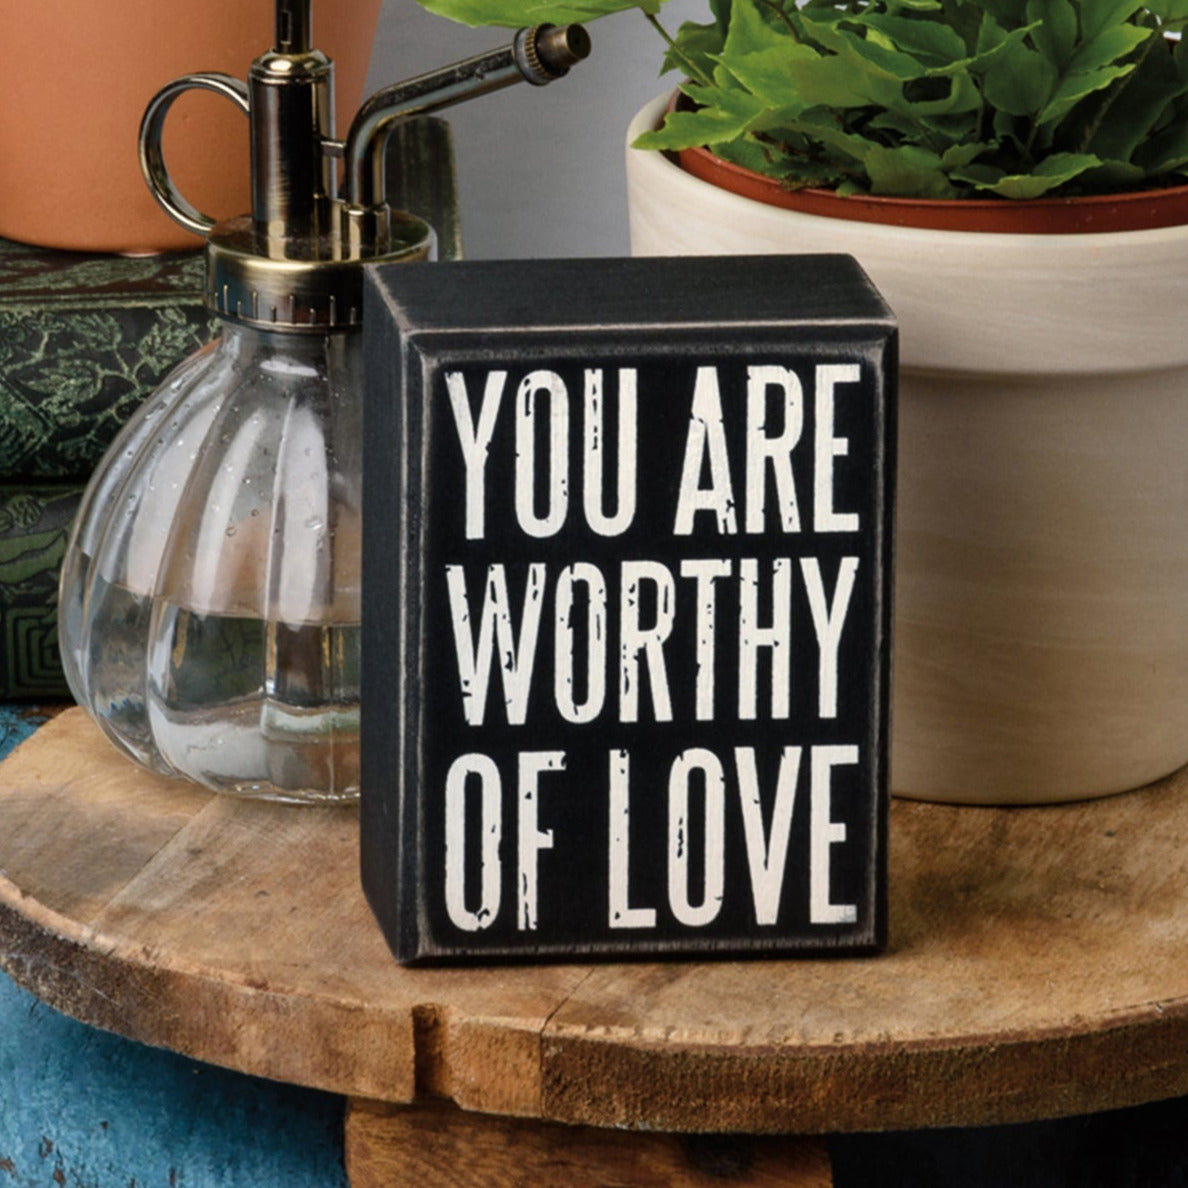 You Are Worthy Of Love Wooden Box Sign | Rustic Farmhouse Decor | 3" x 4"